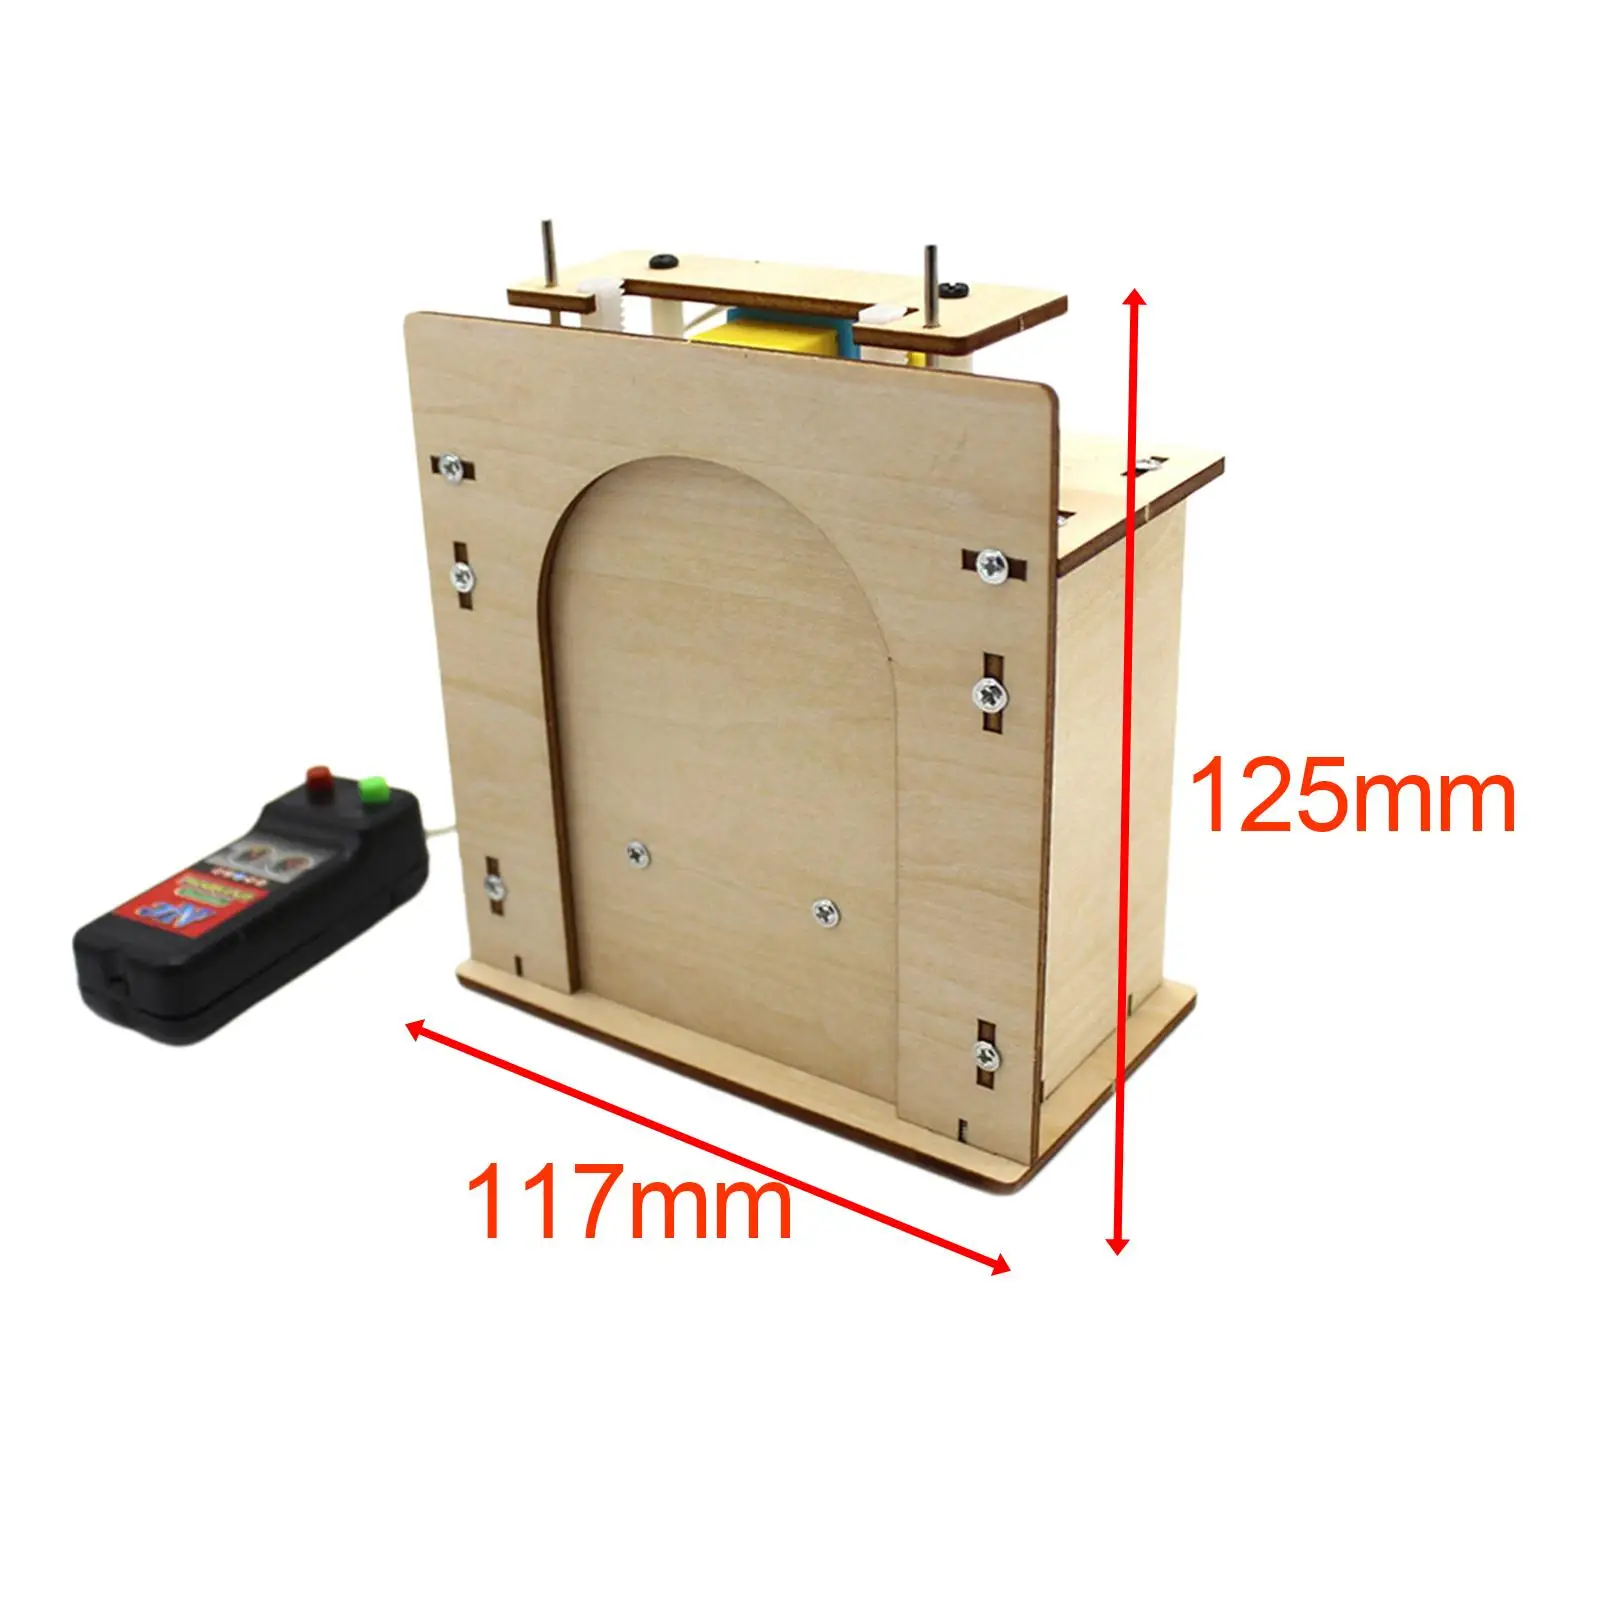 

Wooden Wooden Elevator Door kits Science kits Early Education Toy House Garage Model Physics Balance for Children 6-12 Years Old